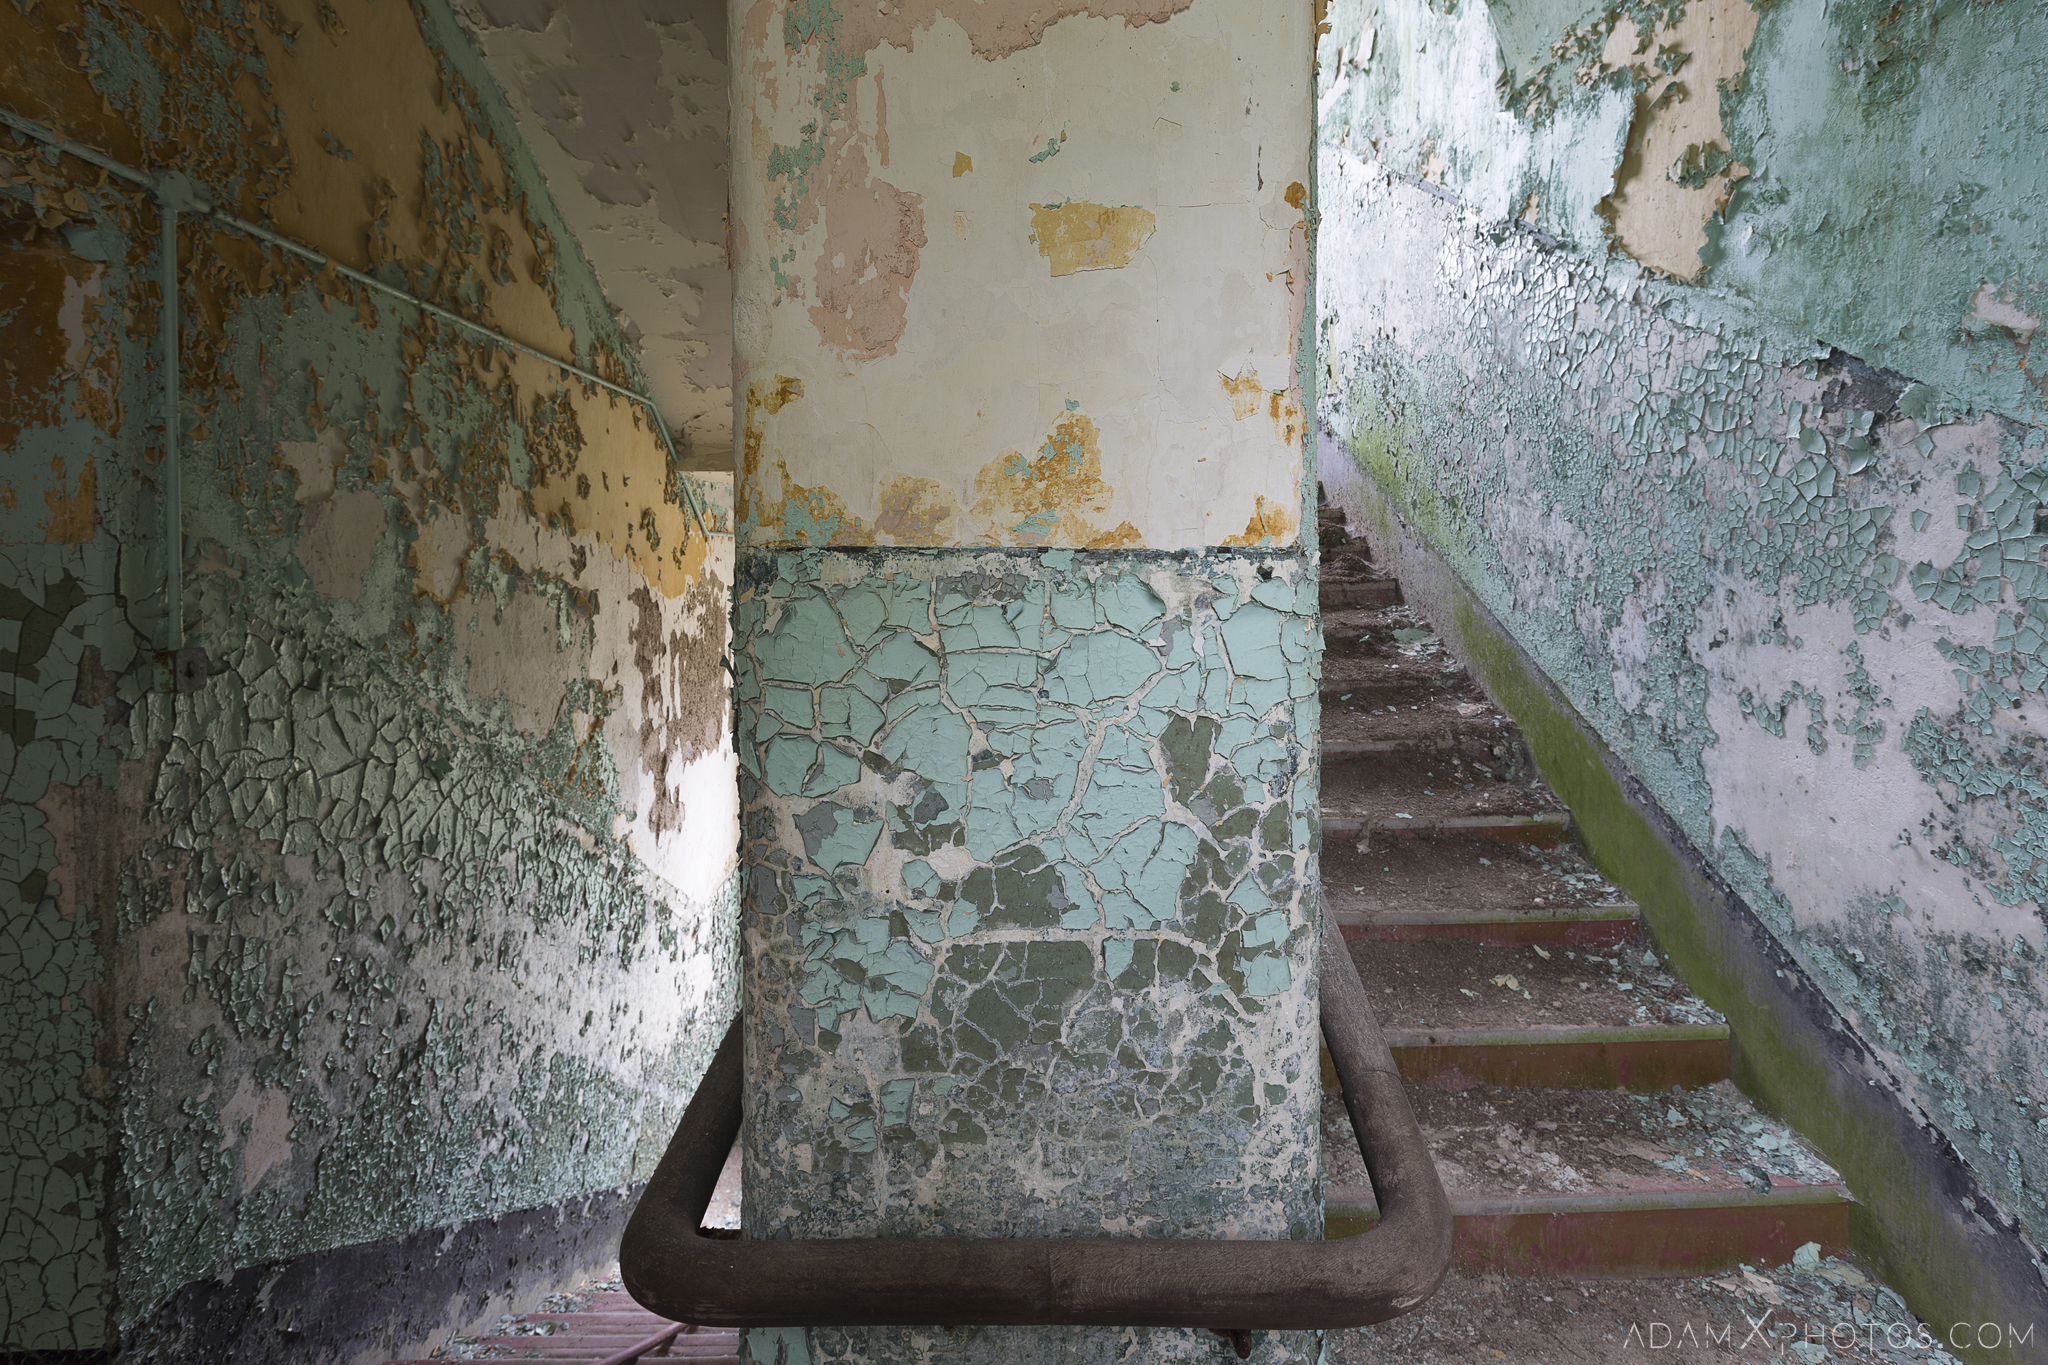 peeling paint staircase blue green cracked Ennis District Lunatic Asylum Our Lady's Hospital Ennis County Clare Adam X Urbex Urban Exploration Ireland Ballinasloe Access 2017 Abandoned decay lost forgotten derelict location creepy haunting eerie